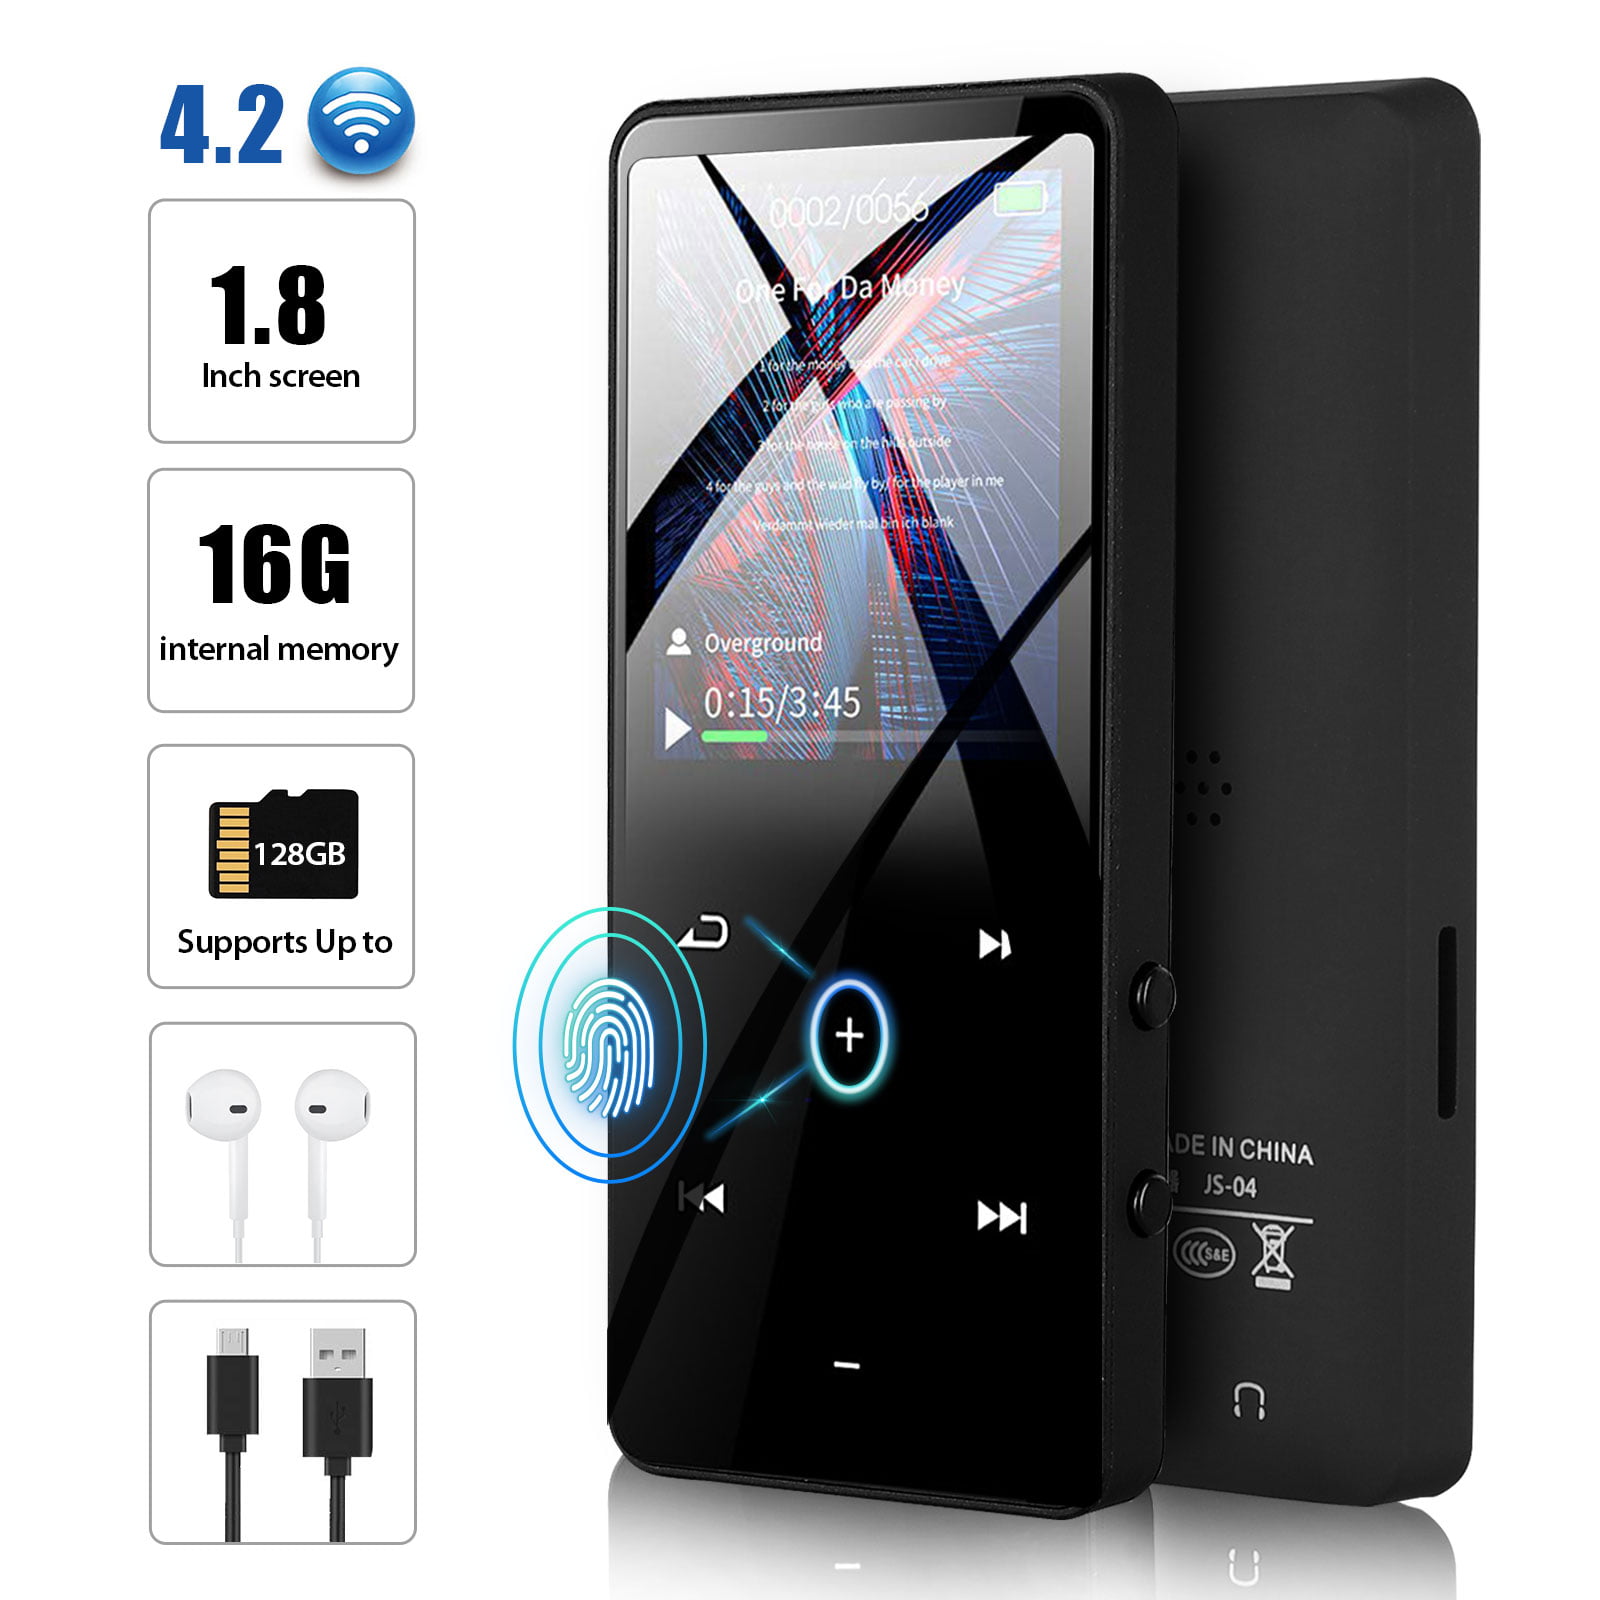 Recorder Portable Lossless Digital Audio Player Supports FM Radio Blue Support up to 128GB Touch Buttons with 1.8-inch Screen Alarm Clock LANGSEN 16G MP3 Player with Bluetooth 4.2